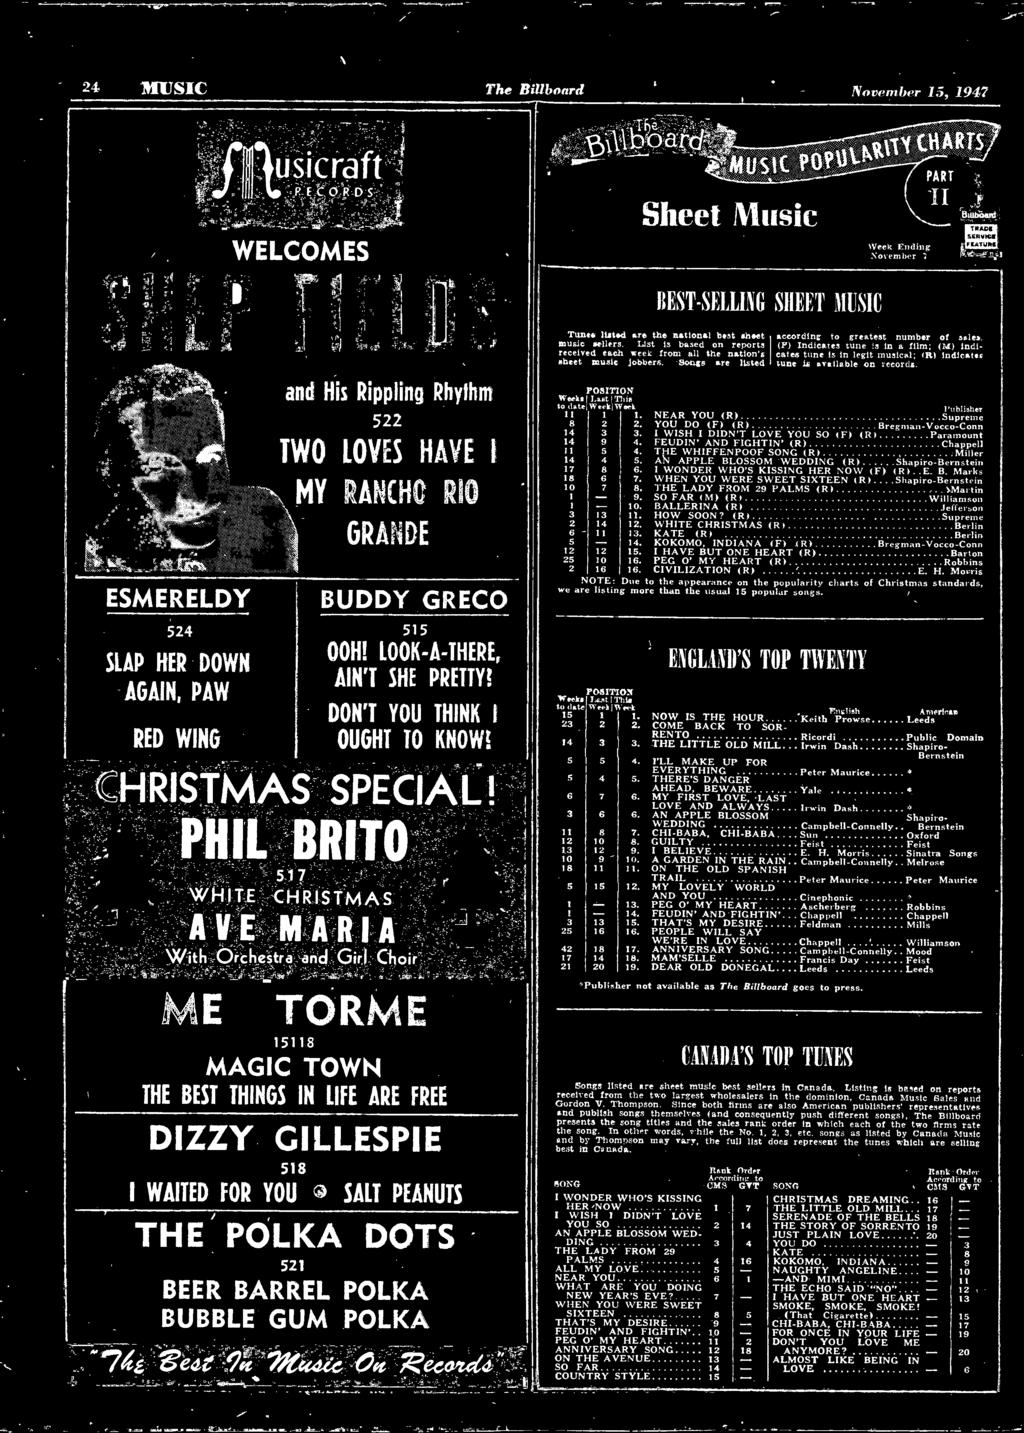 PHIL BRITO 517 WHITE CHRISTMAS AVE MARIA DON'T YOU THINK I MEL TORME 15118 MAGIC TOWN THE BEST THINGS IN LIFE ARE FREE DIZZY GI LLESPI E 518 I WAITED FOR YOU SALT PEANUTS THE POLKA DOTS 521 BEER